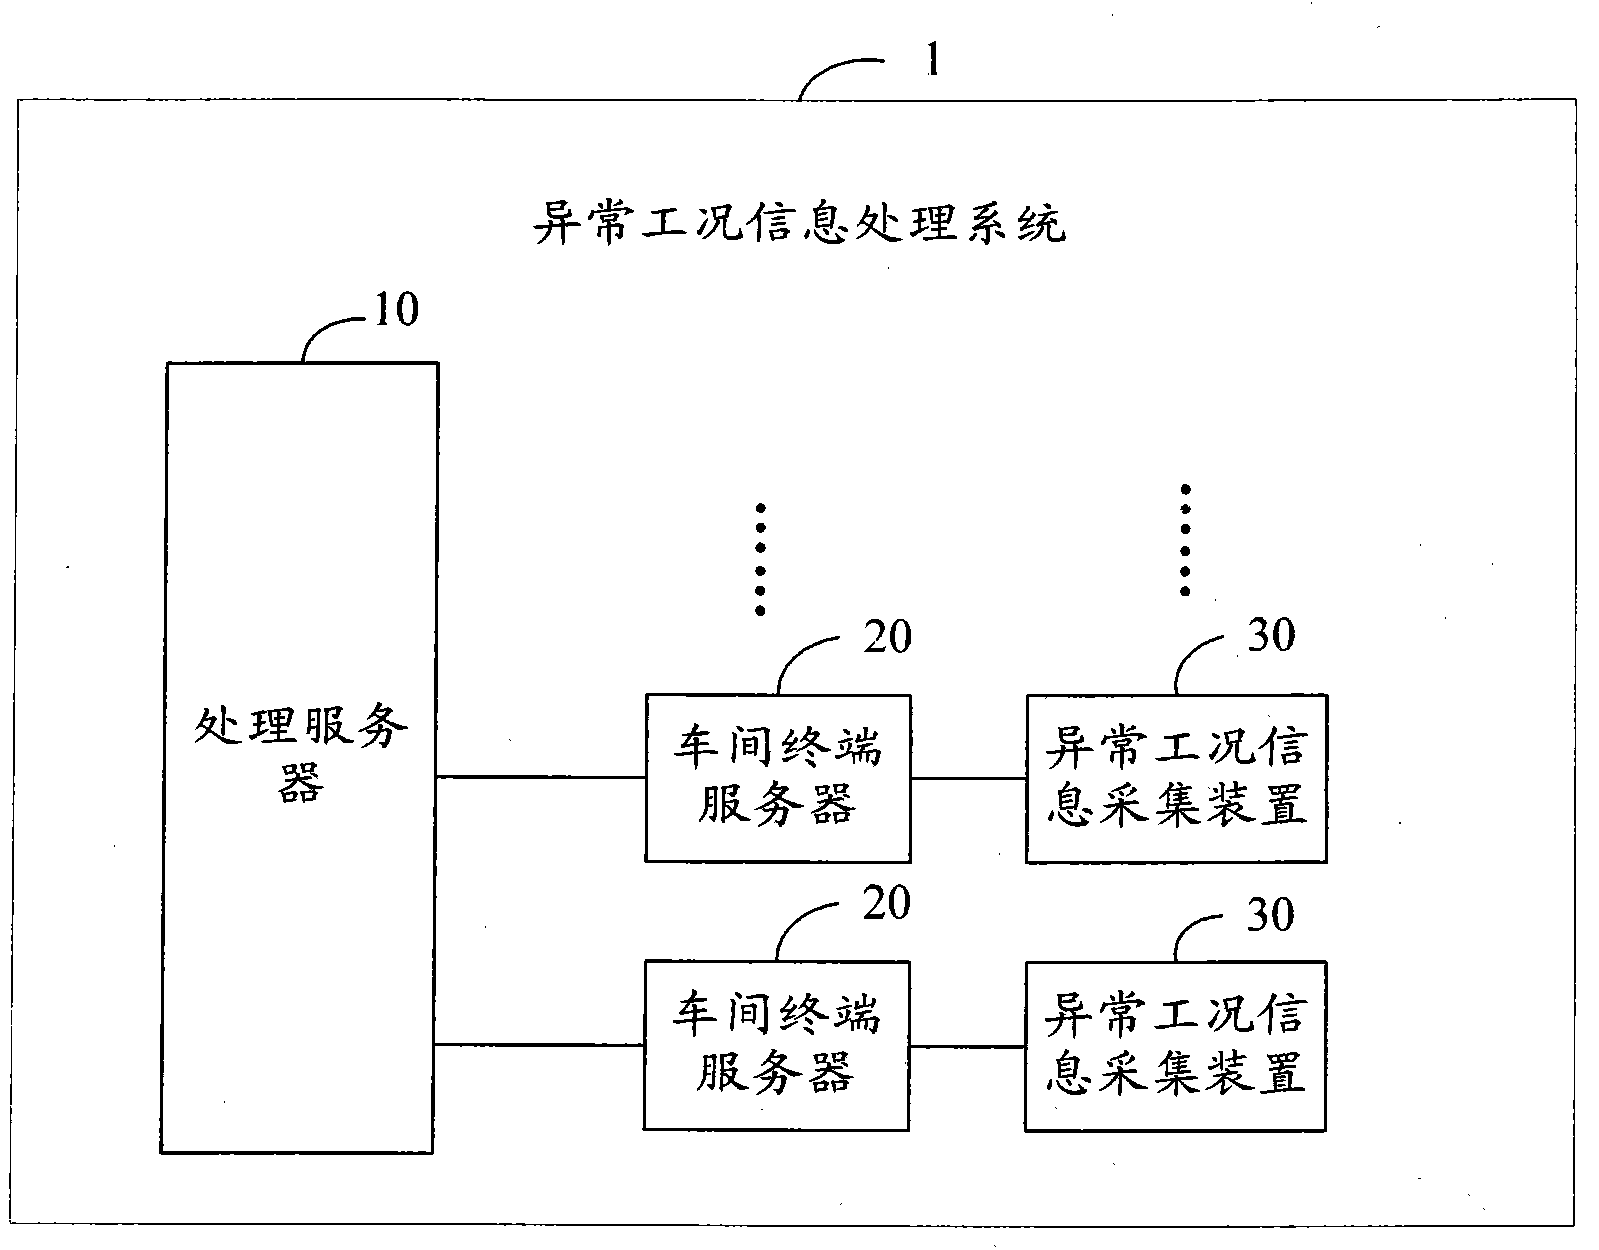 Abnormal working condition information processing system and method